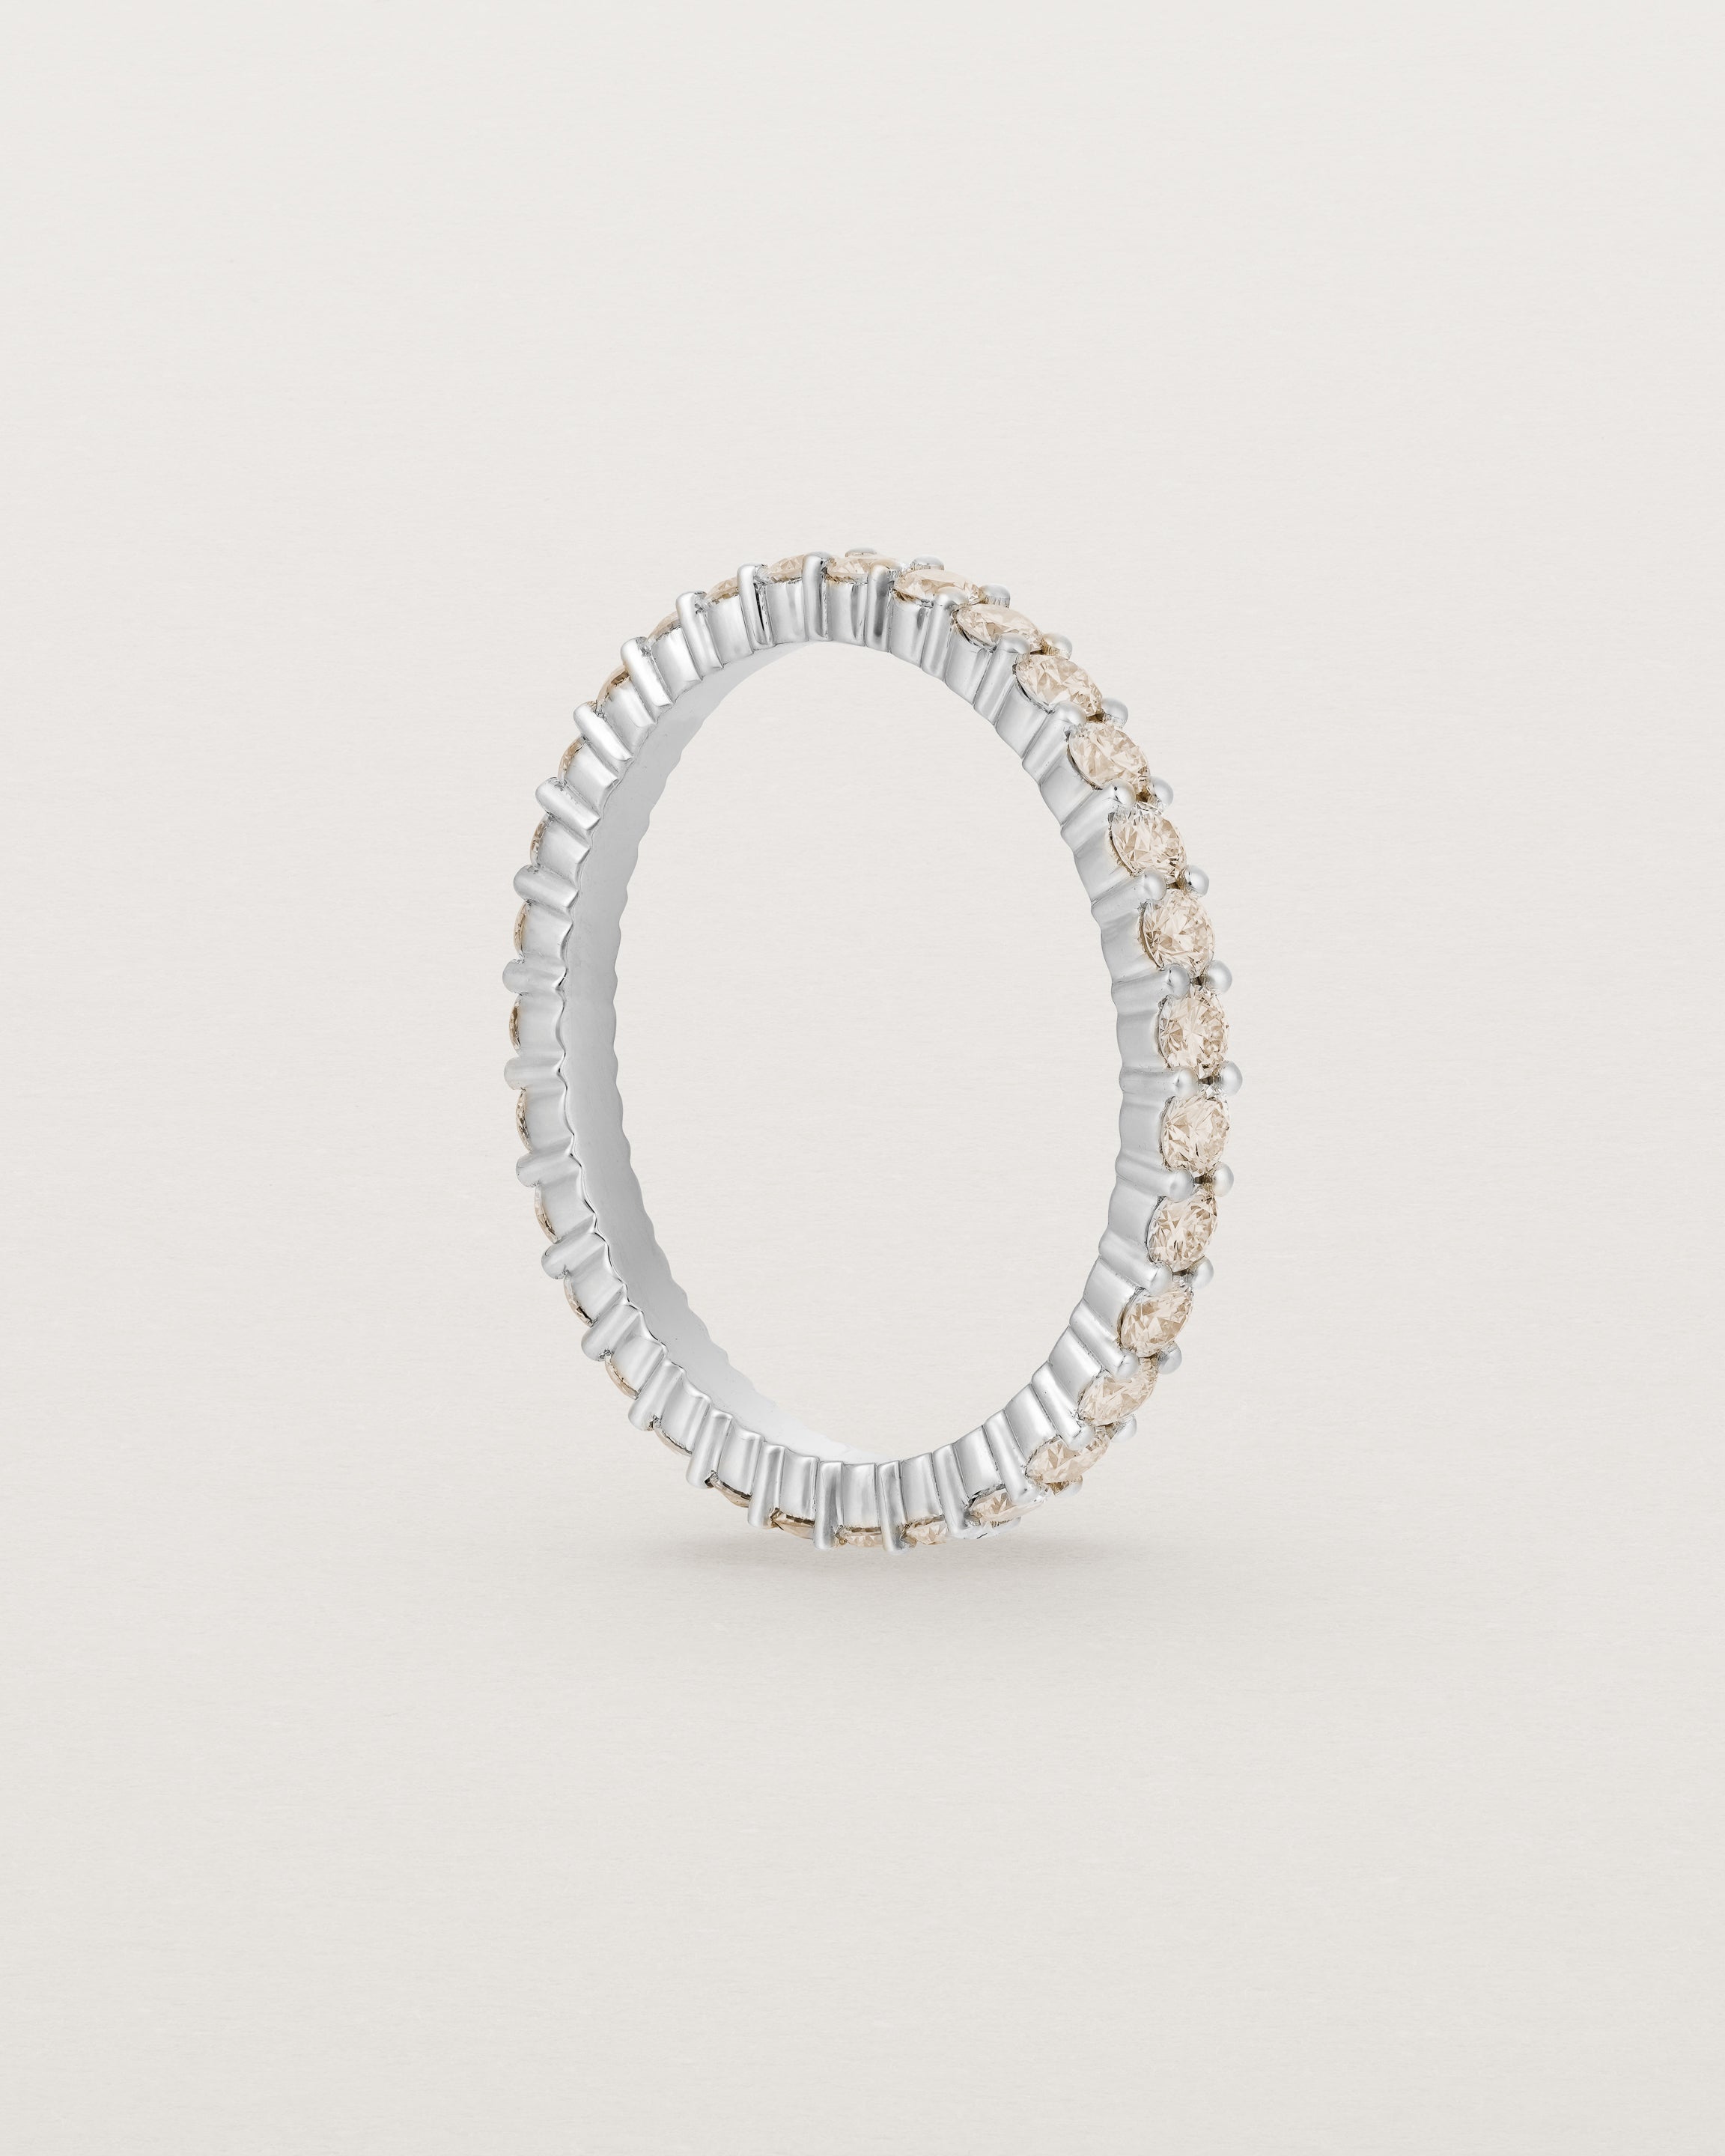 Standing view of the Grace Ring | Champagne Diamonds | White Gold.